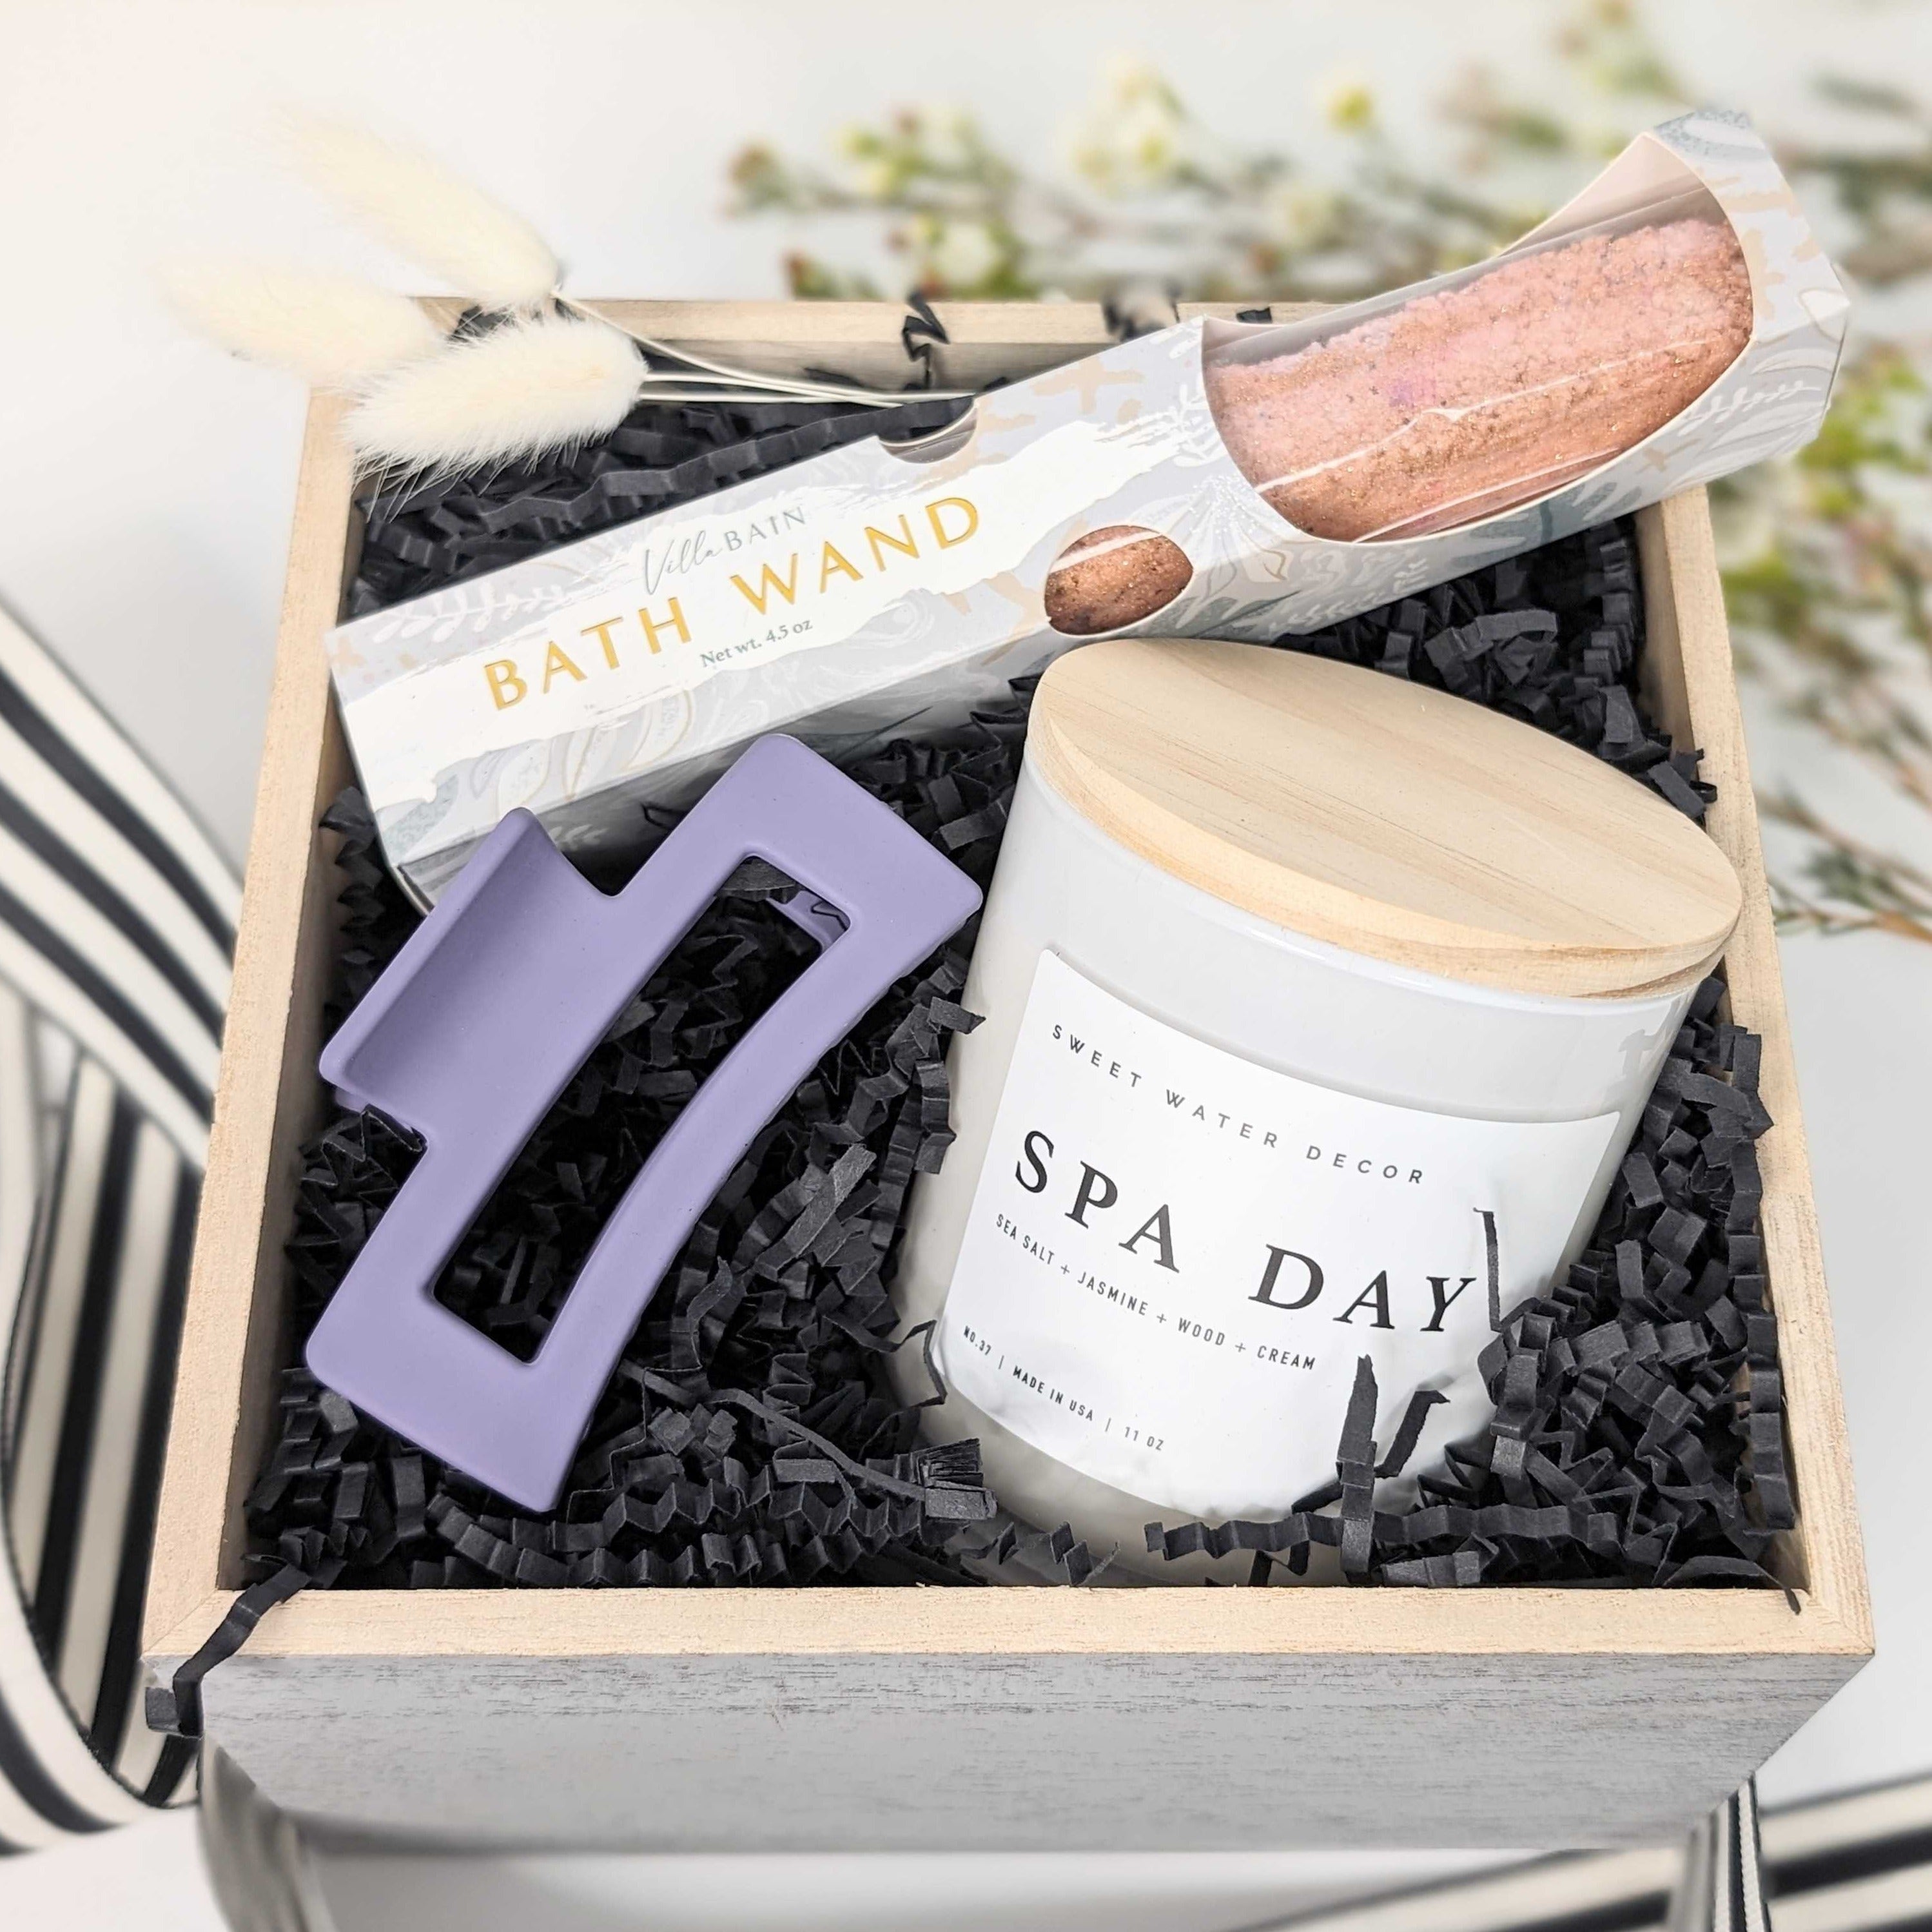 Spa Day Gift box with candle, hair clip and bath wand